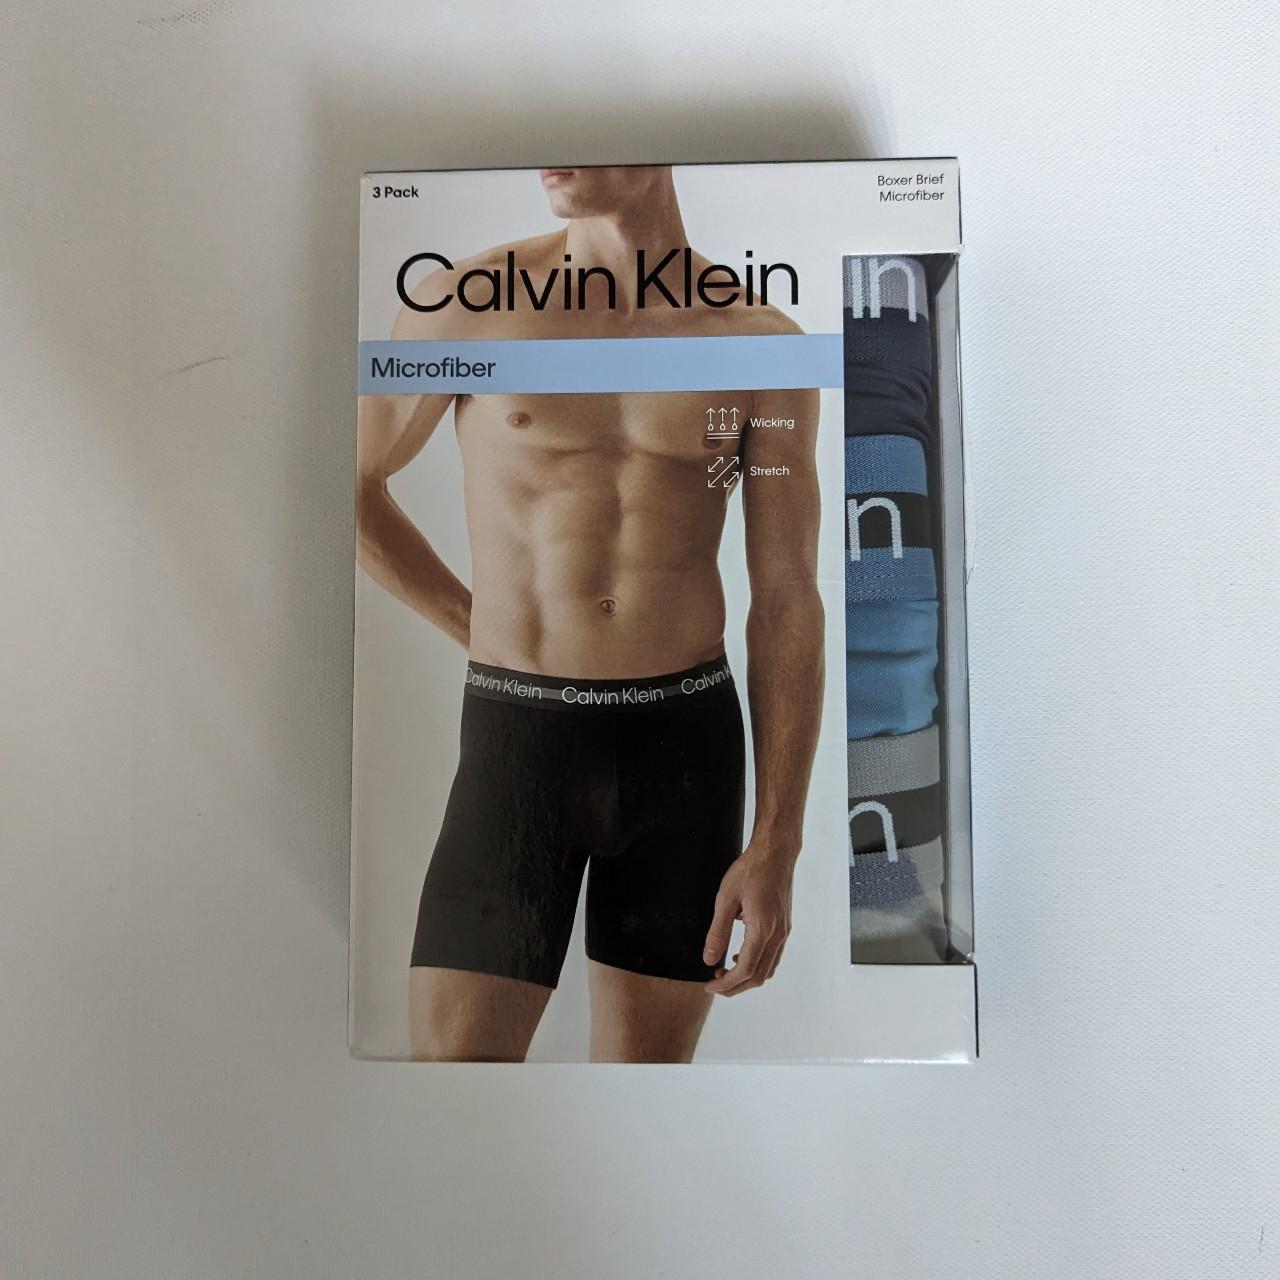 Calvin Klein Men's Grey and Blue Boxers-and-briefs